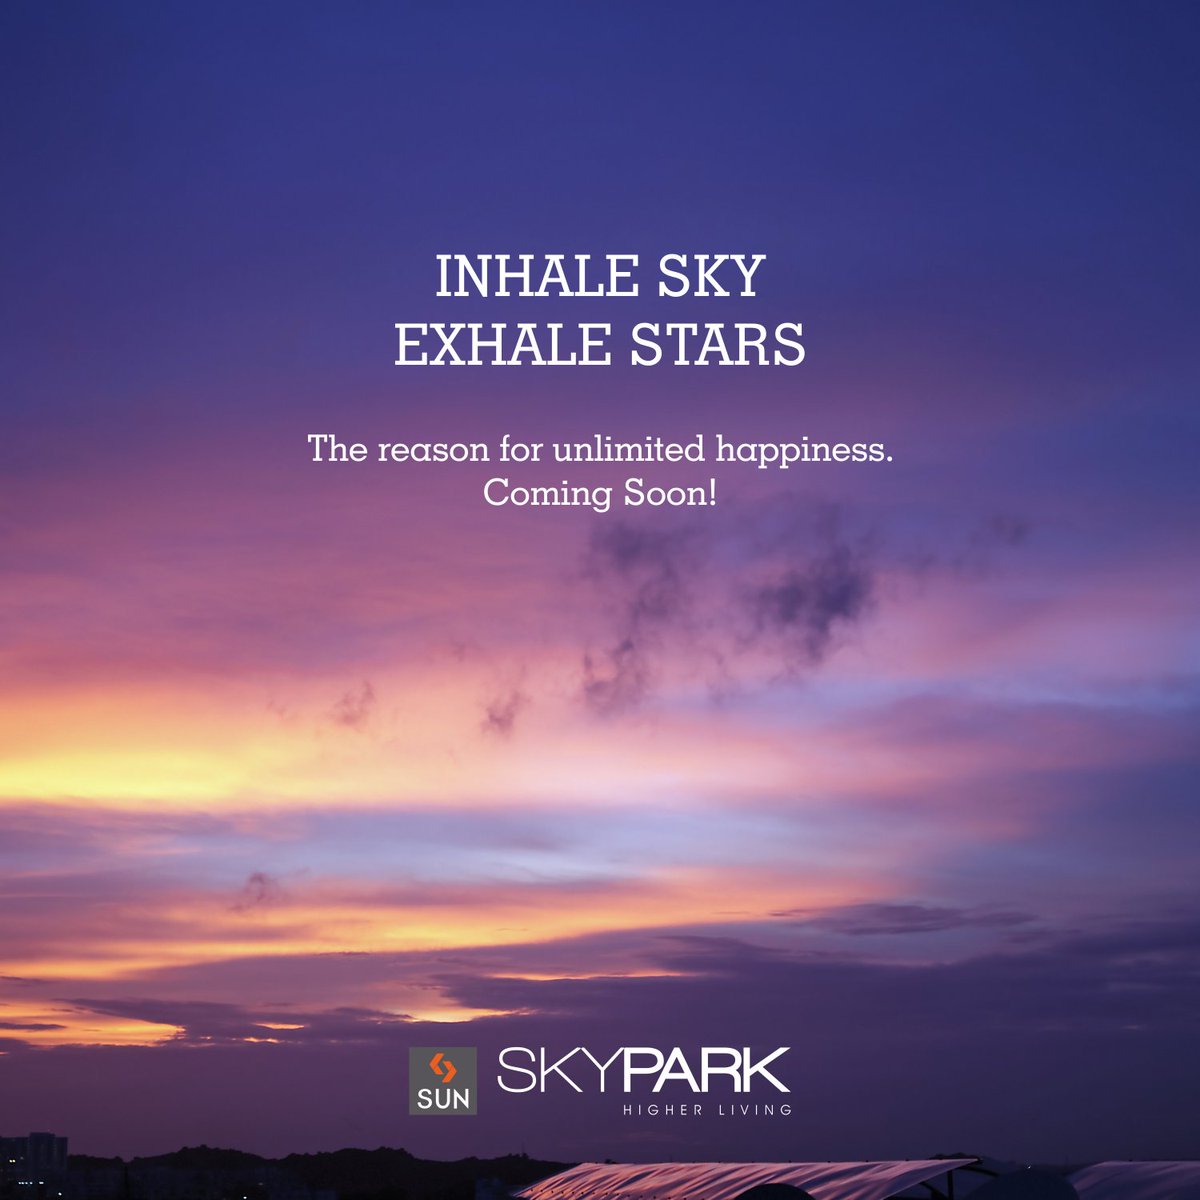 #SunSkyPark is coming soon with your beautiful tomorrow that guarantees utmost happiness. 
#UpcomingProject https://t.co/9dN720Nx5p